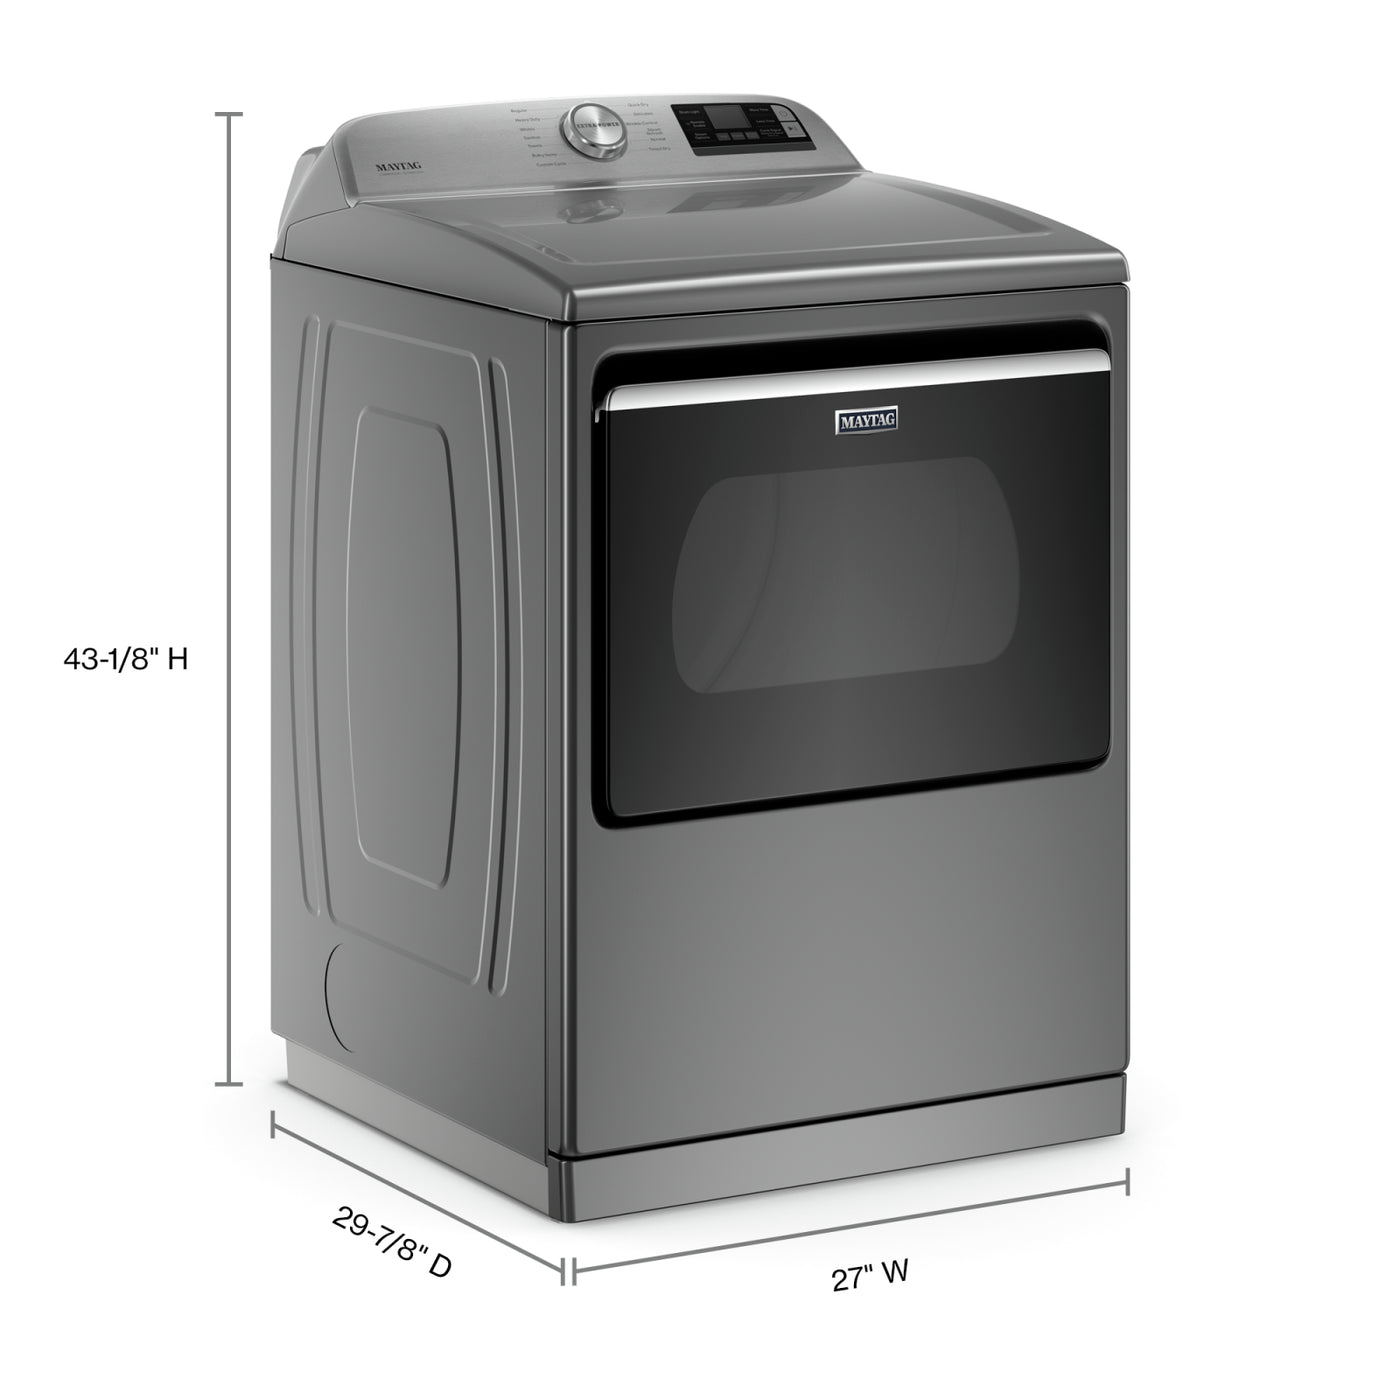 Maytag Metallic Slate Smart Electric Dryer with Steam (7.4 Cu.Ft.) - YMED7230HC